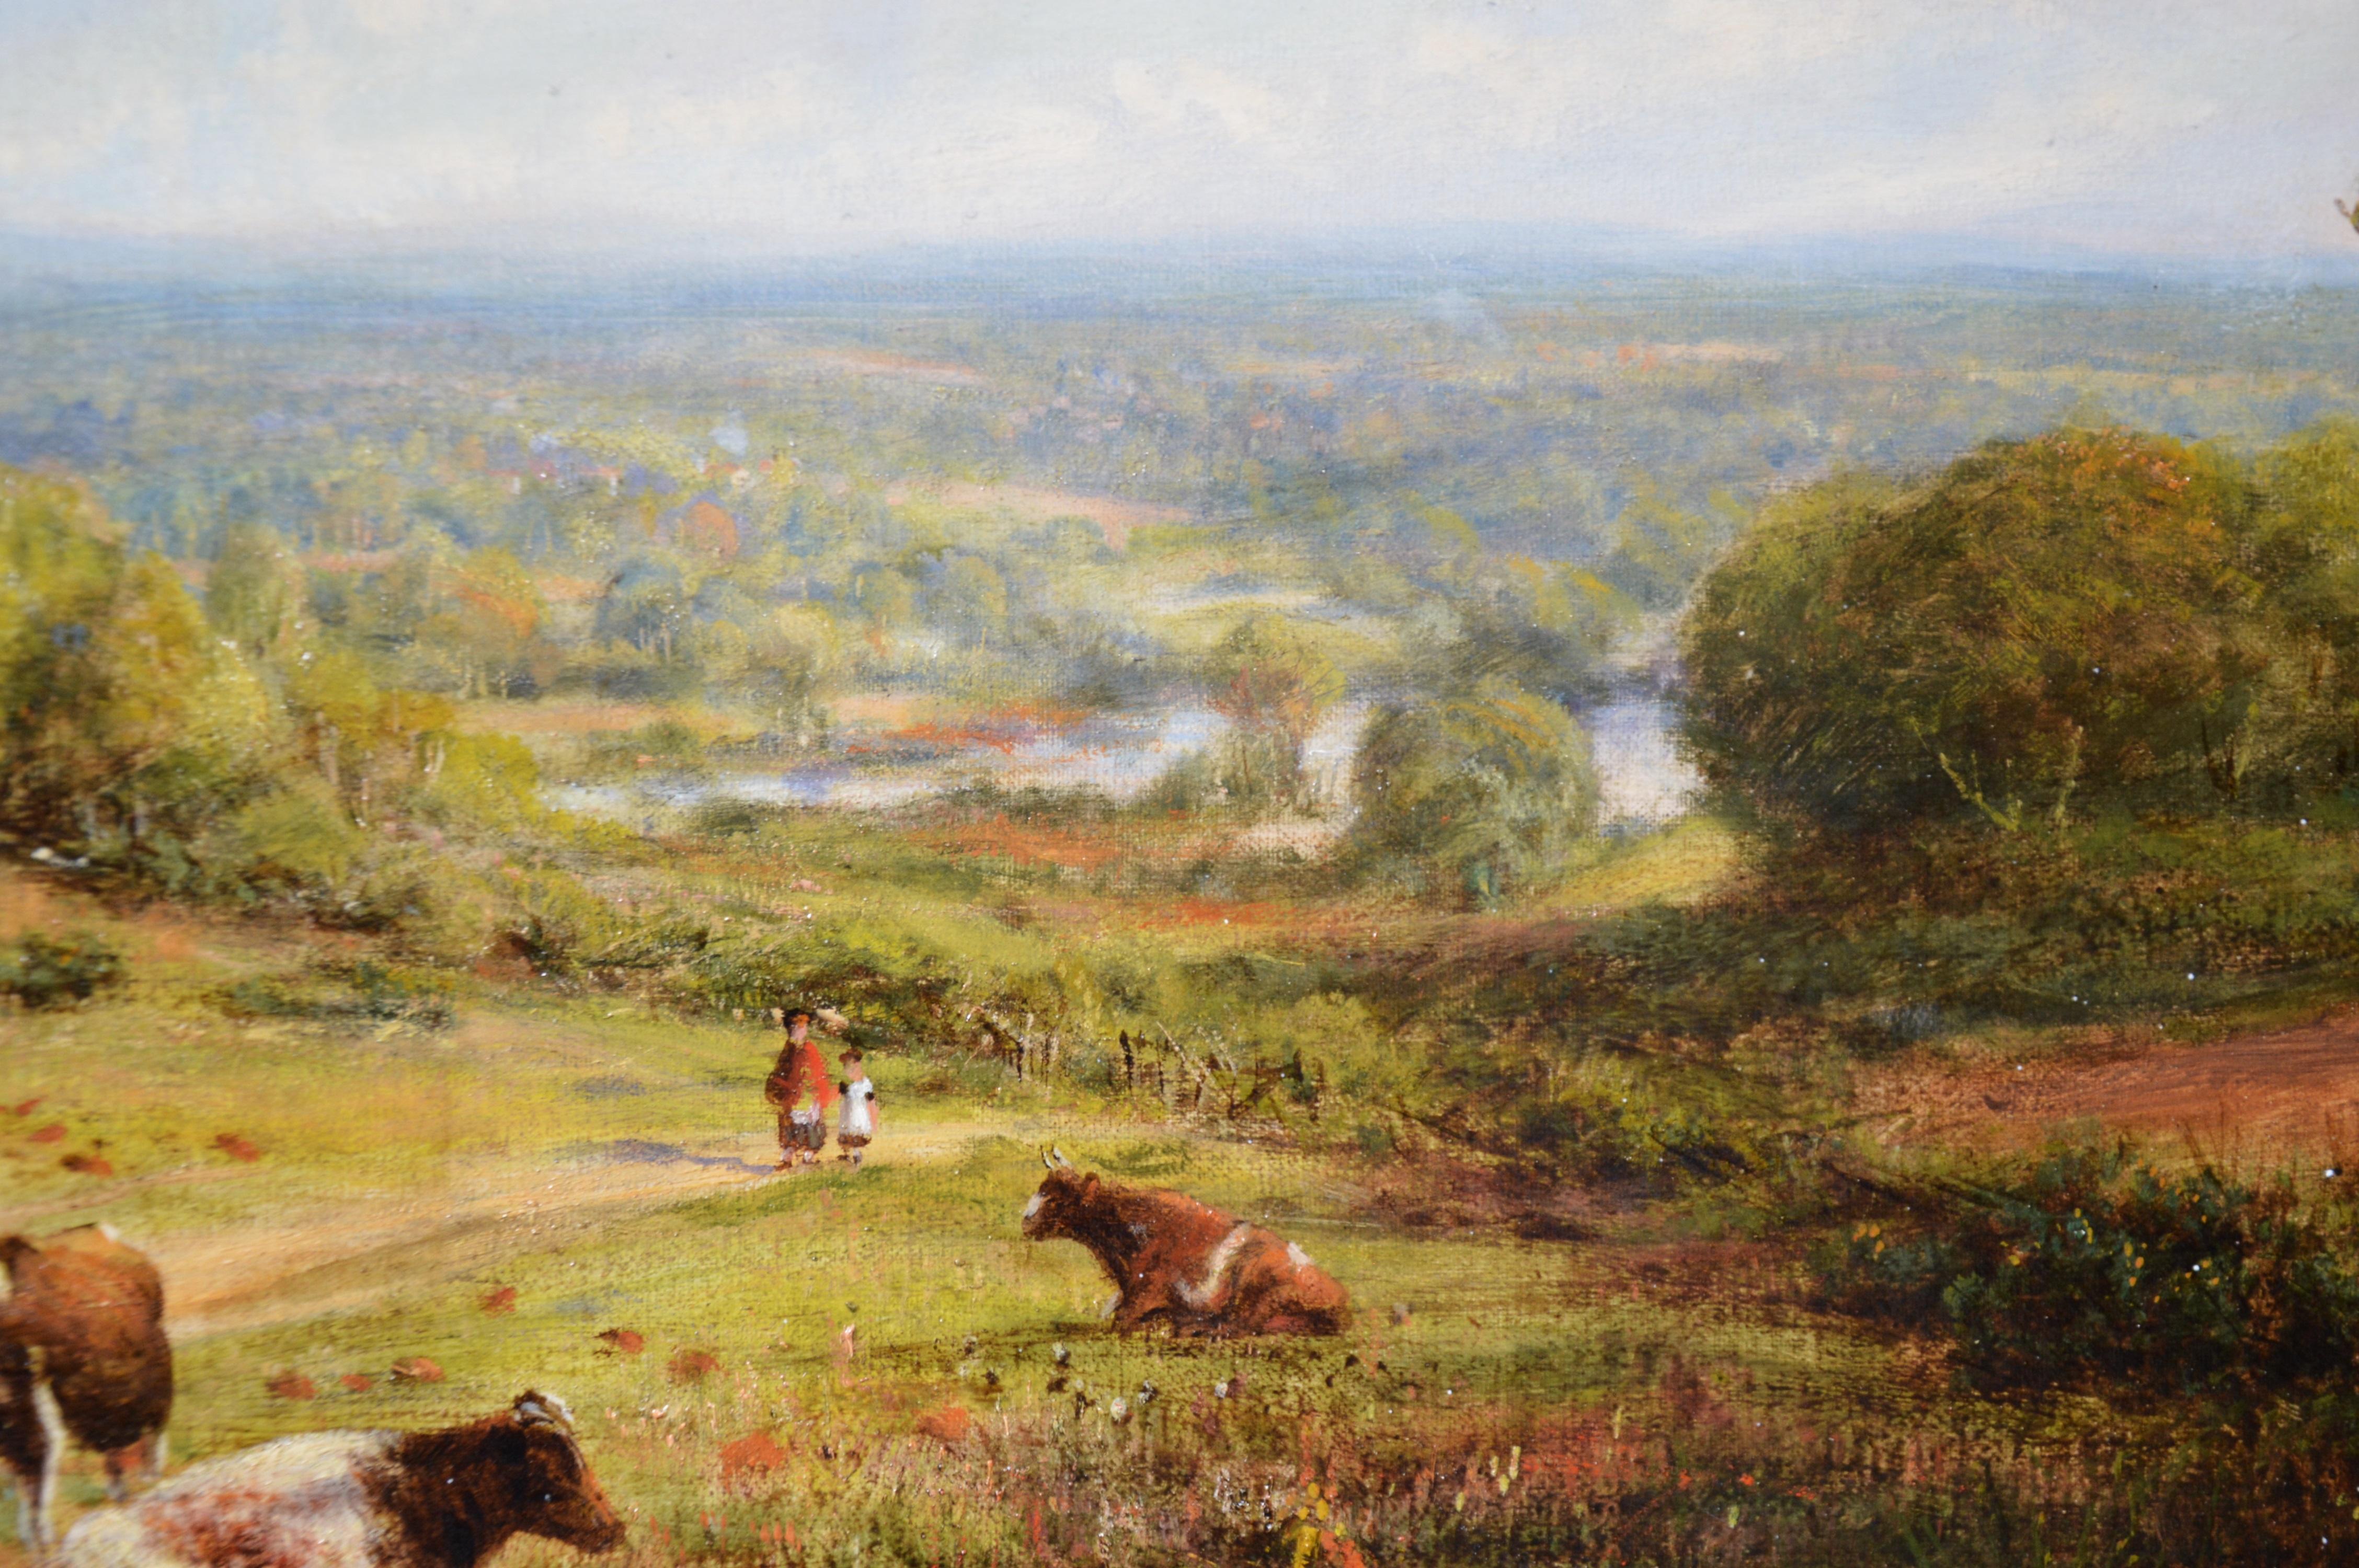 ‘View from the North Downs, Surrey’ by George William Mote (1832-1909). 

The painting – which depicts an extensive landscape of the English home counties - is signed by the artist and dated 1883. It is presented in a fine quality, bespoke gold